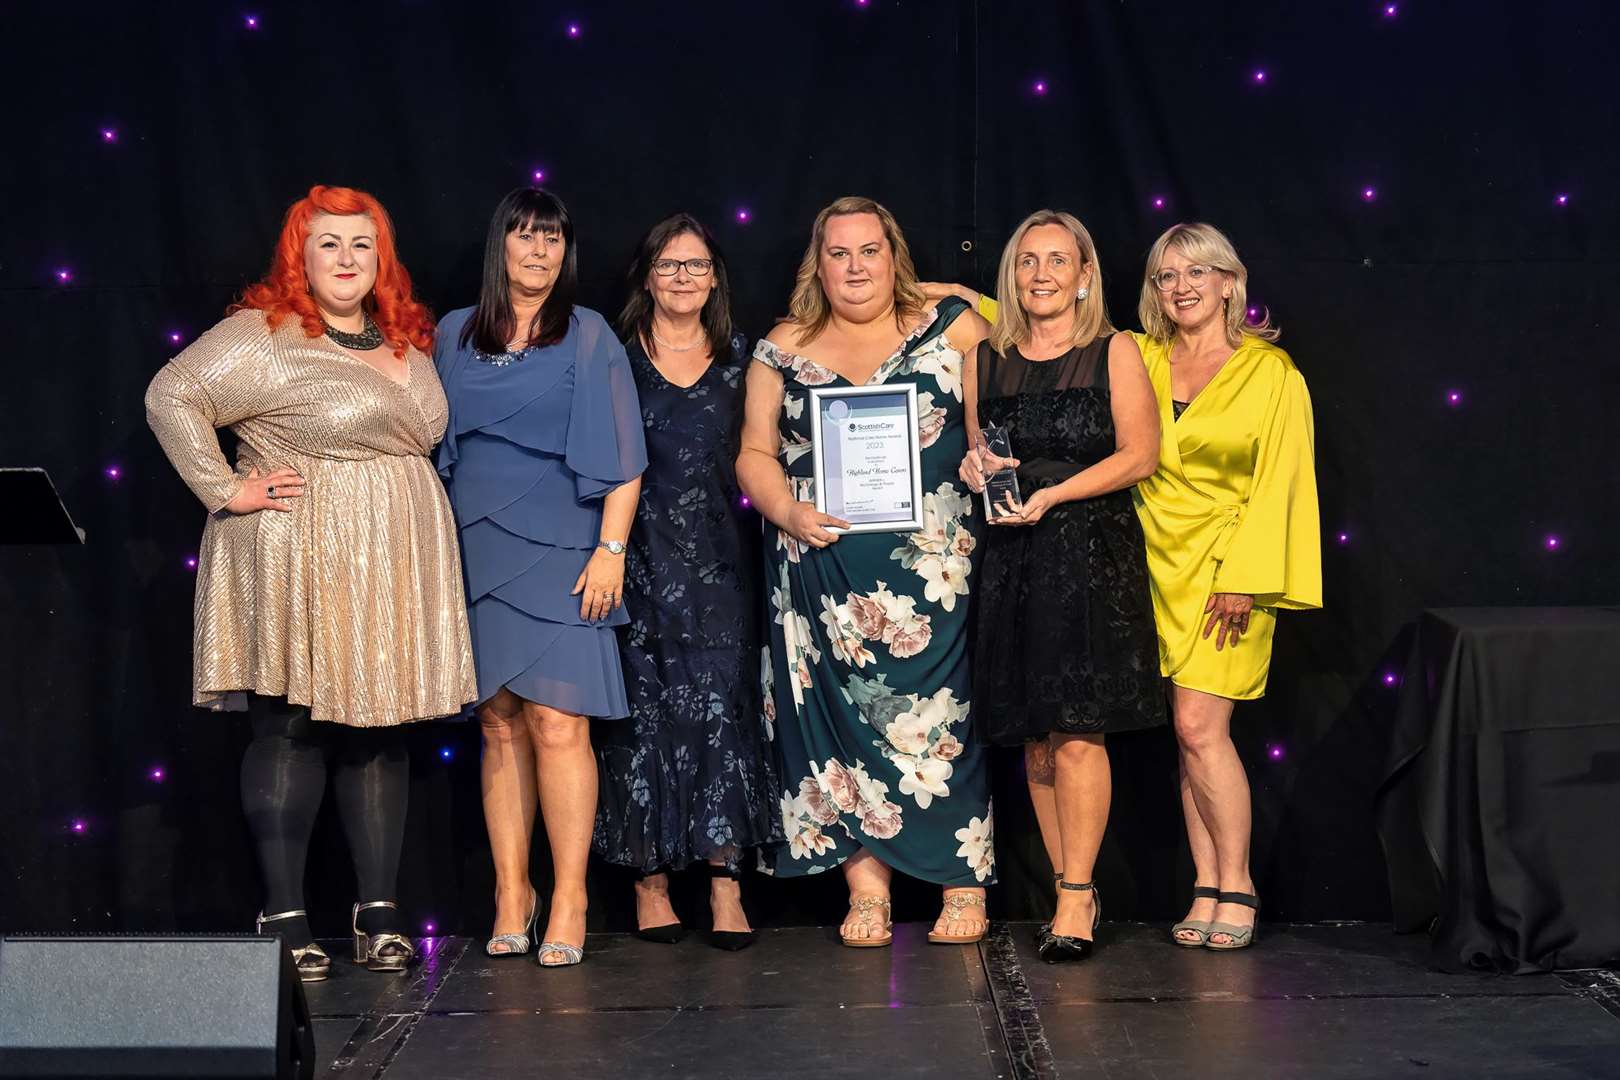 At the awards with Michelle McManus (singer/compere, left), Sandra Clark, Carolanne Mainland, Tina Simpson, Gillian Murphy and Nicola Cooper.